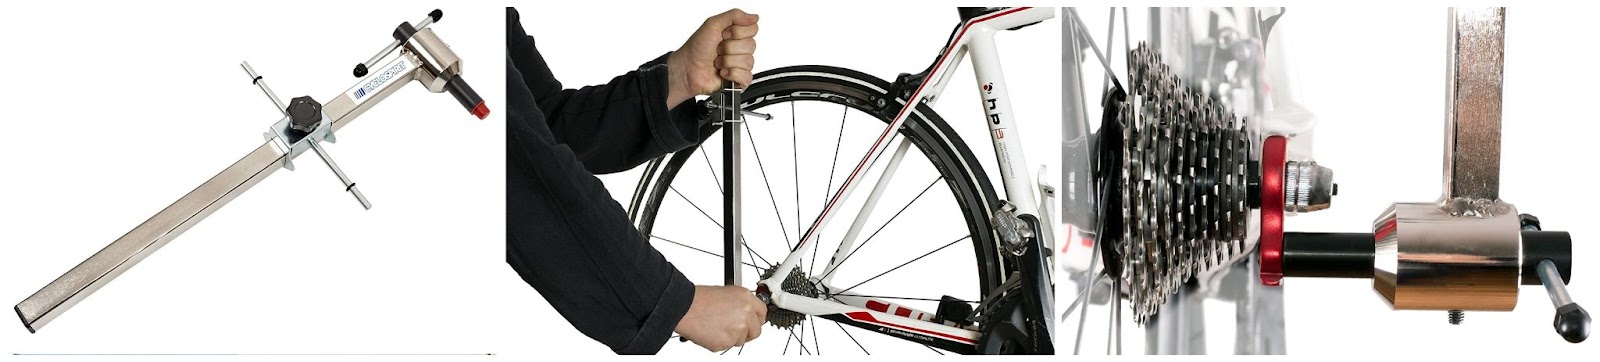 A derailleur alignment gauge is not an essential part of your mountain bike tool kit but could be useful if you have been involved in a collision.